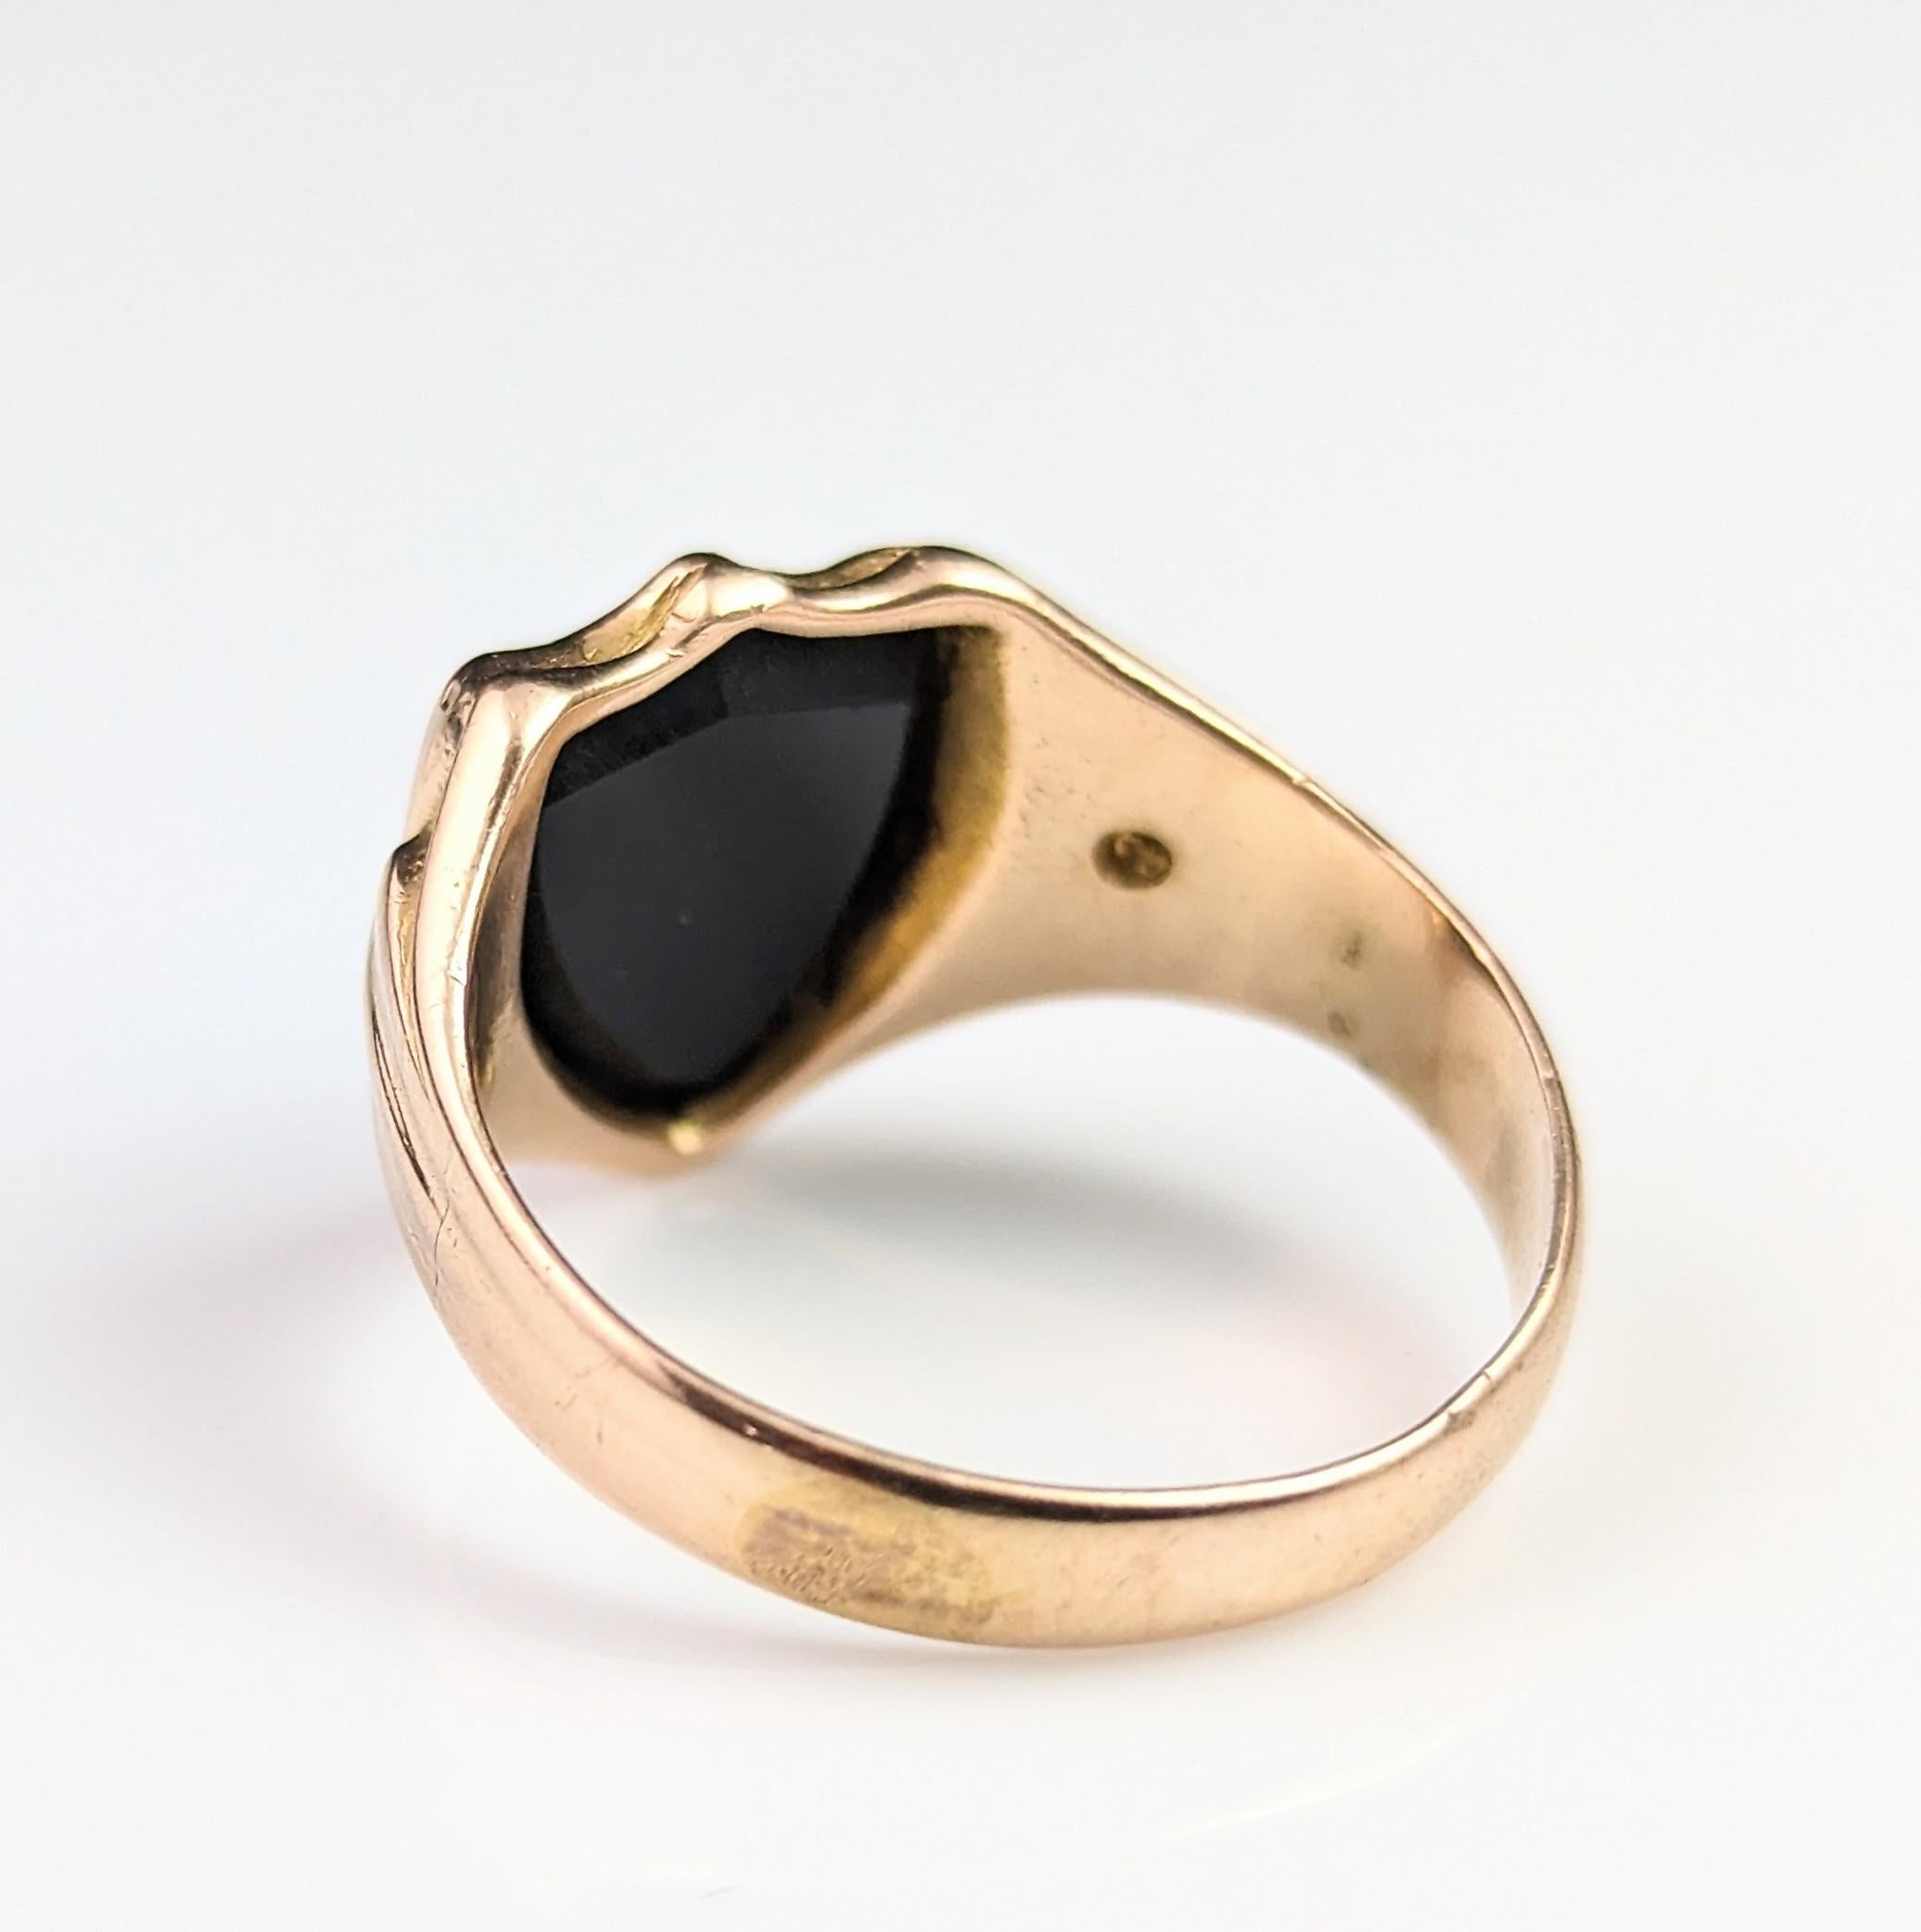 Antique 15k Gold Onyx Signet Ring, Shield Shaped, Pinky, Victorian 9